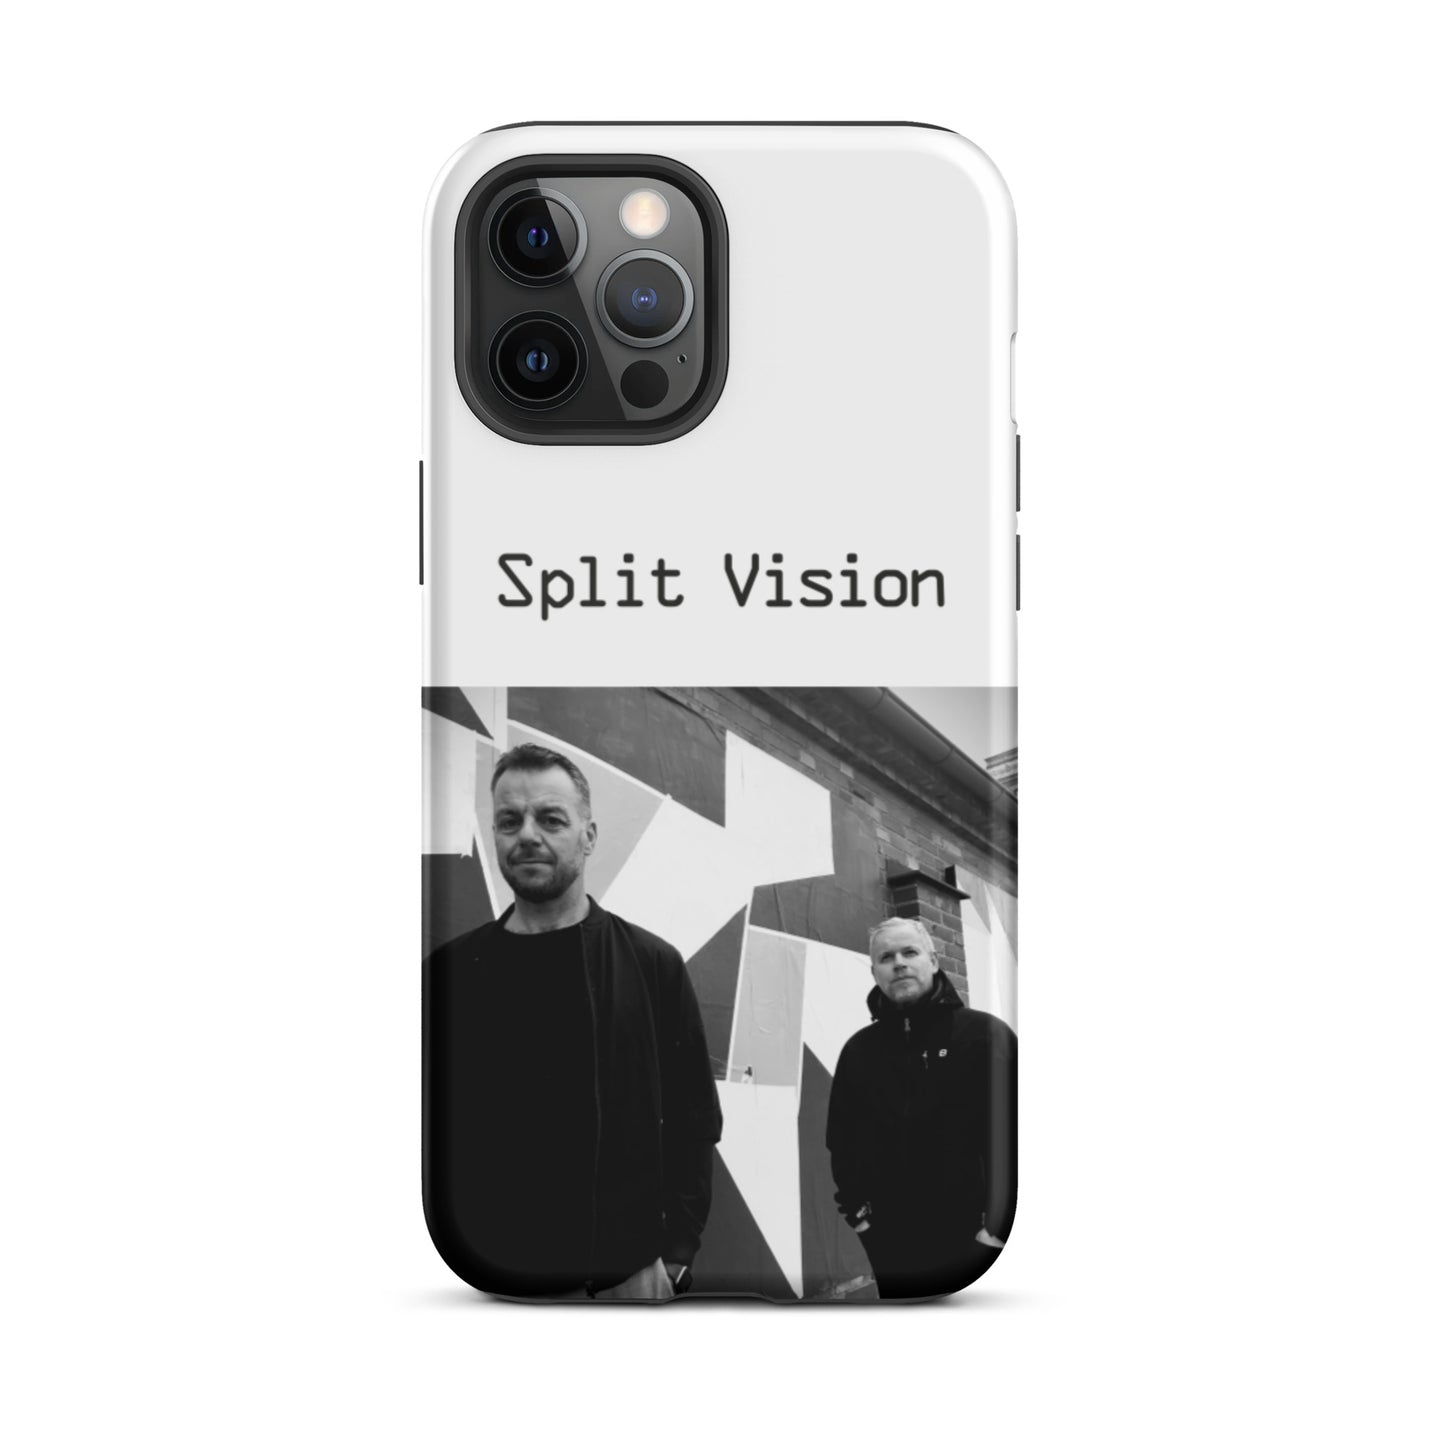 Split Vision, official band photo and logo, Tough iPhone case